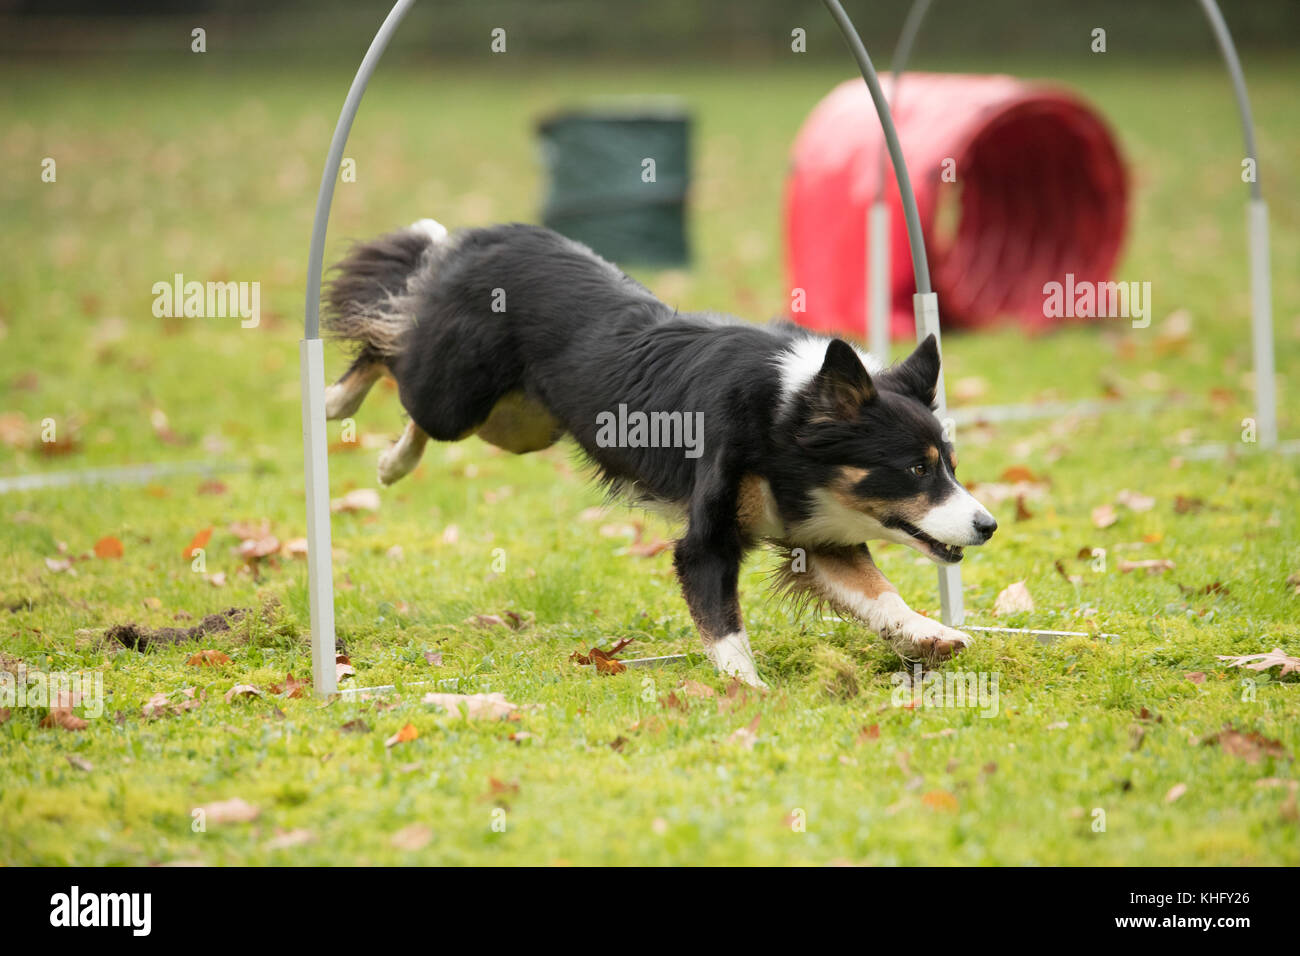 Dog, Border Collie, running in agility competition Stock Photo